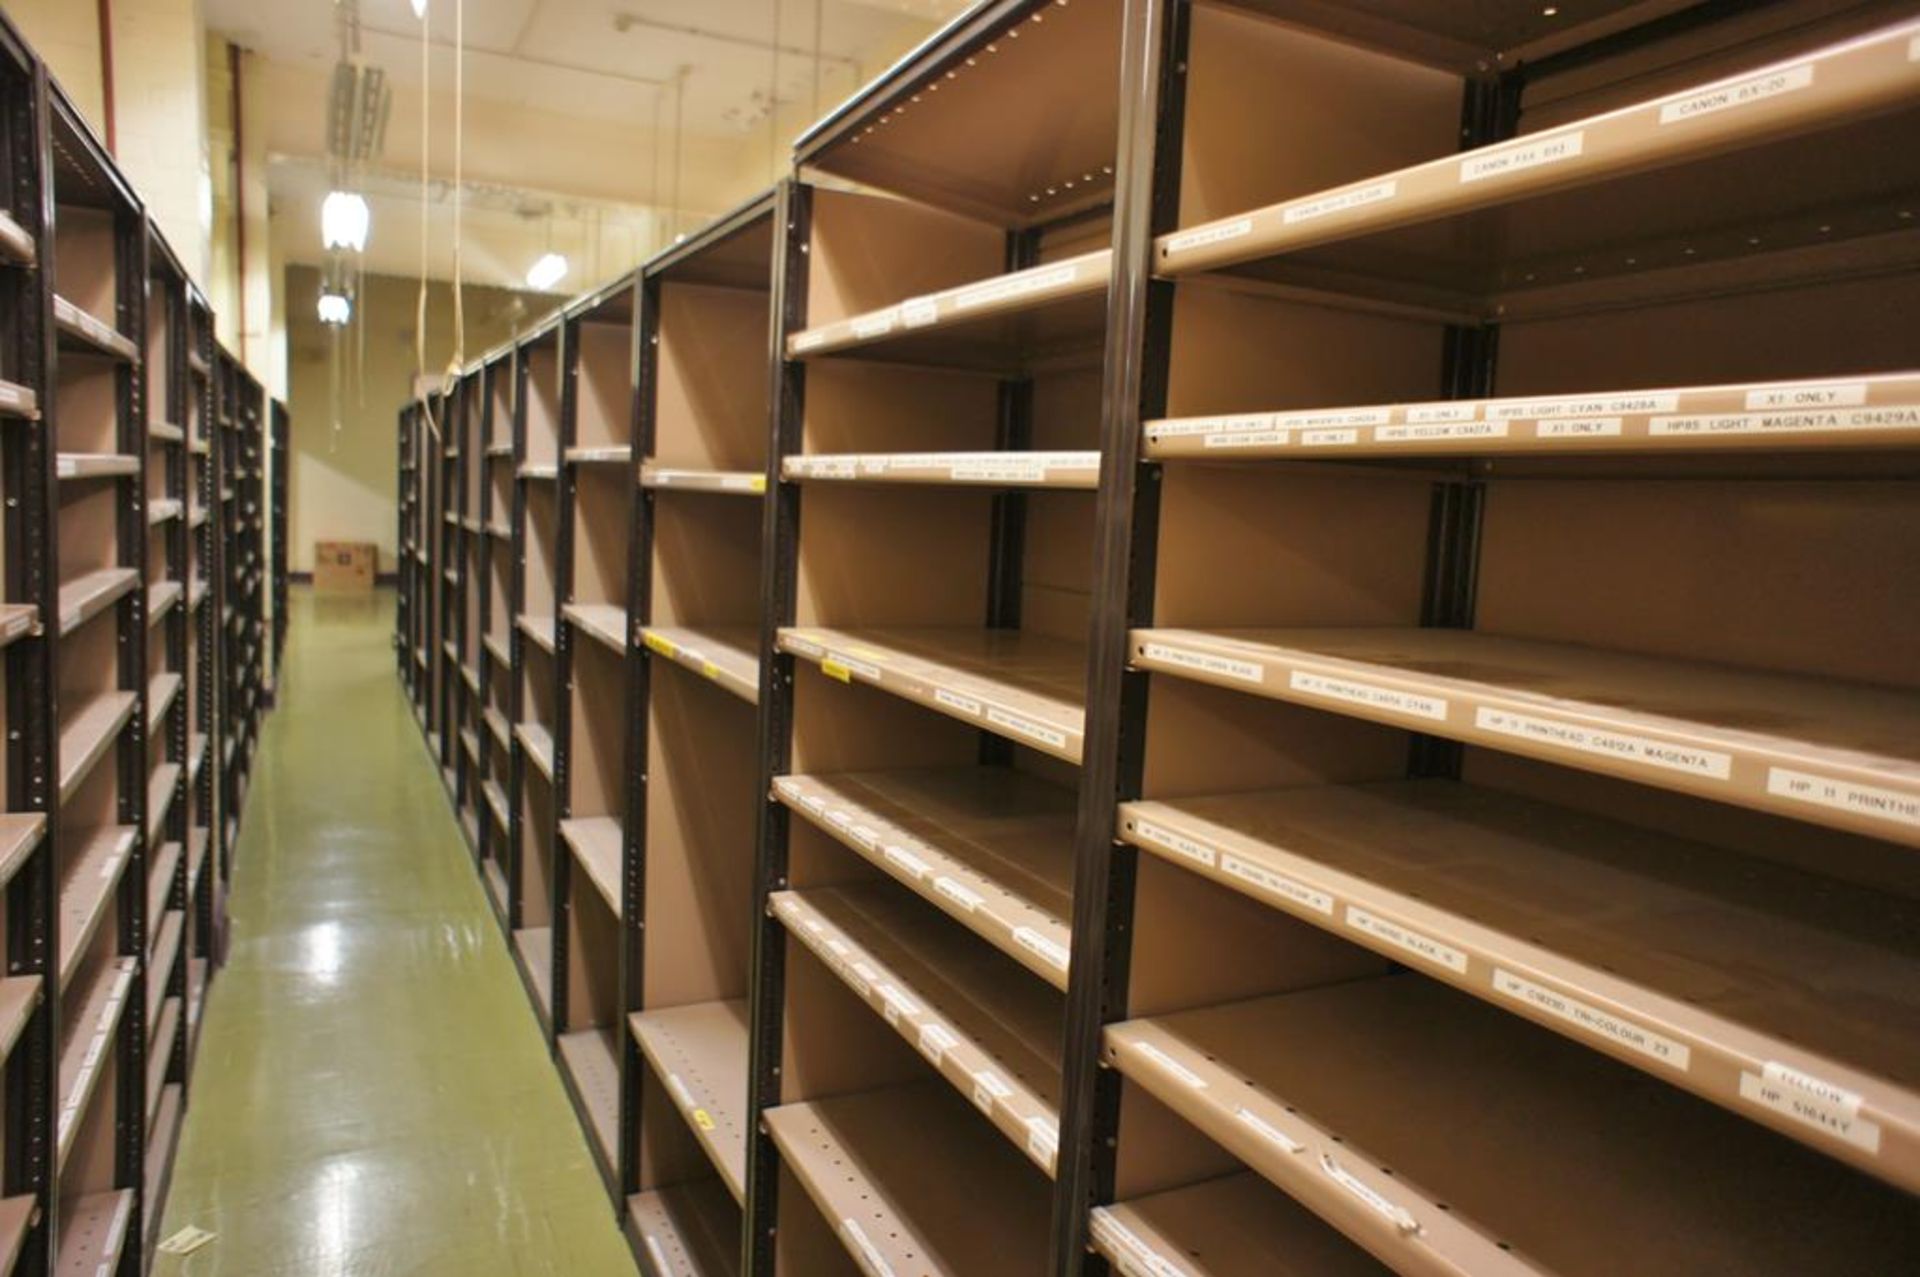 * 24 Bays of Multi Tier Boltless Shelving 2400x1000x420 Photographs are provided for example